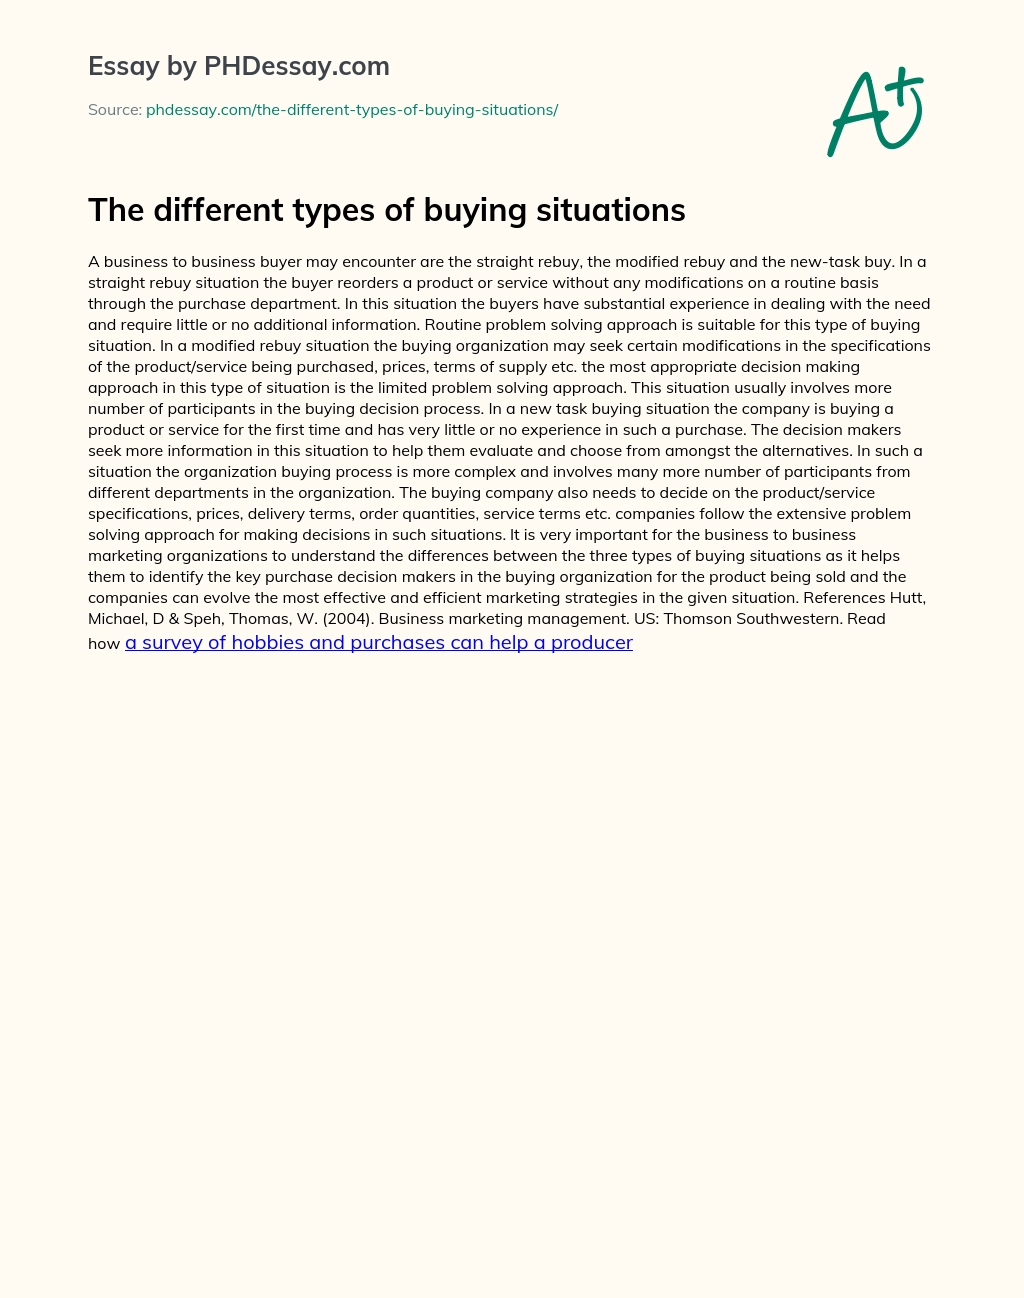 The different types of buying situations essay